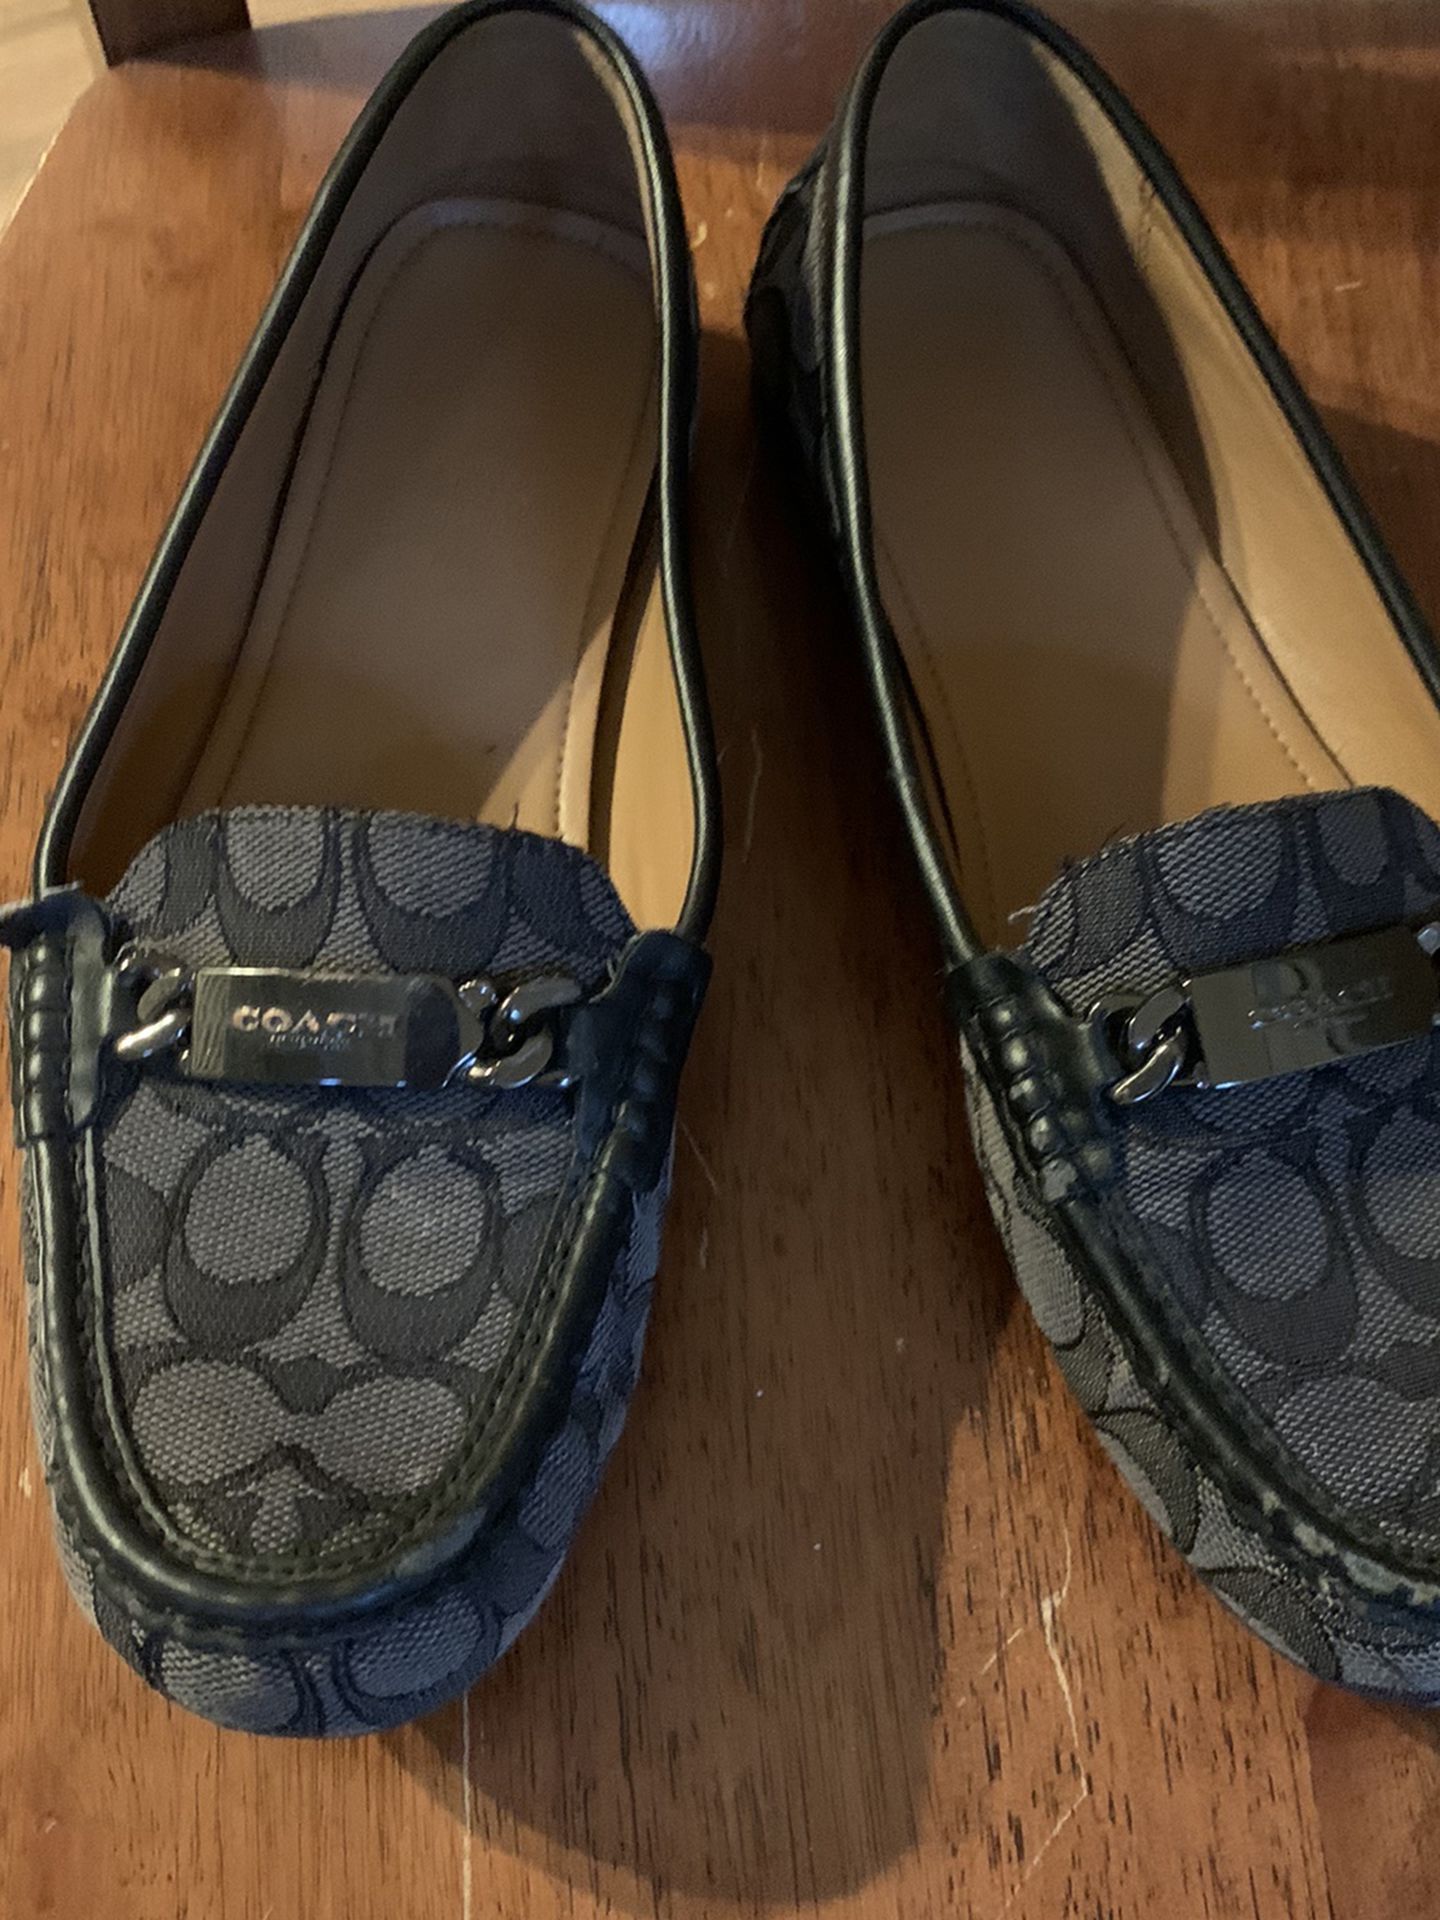 Authentic Coach Loafers / Flats Leather Sz 9.5